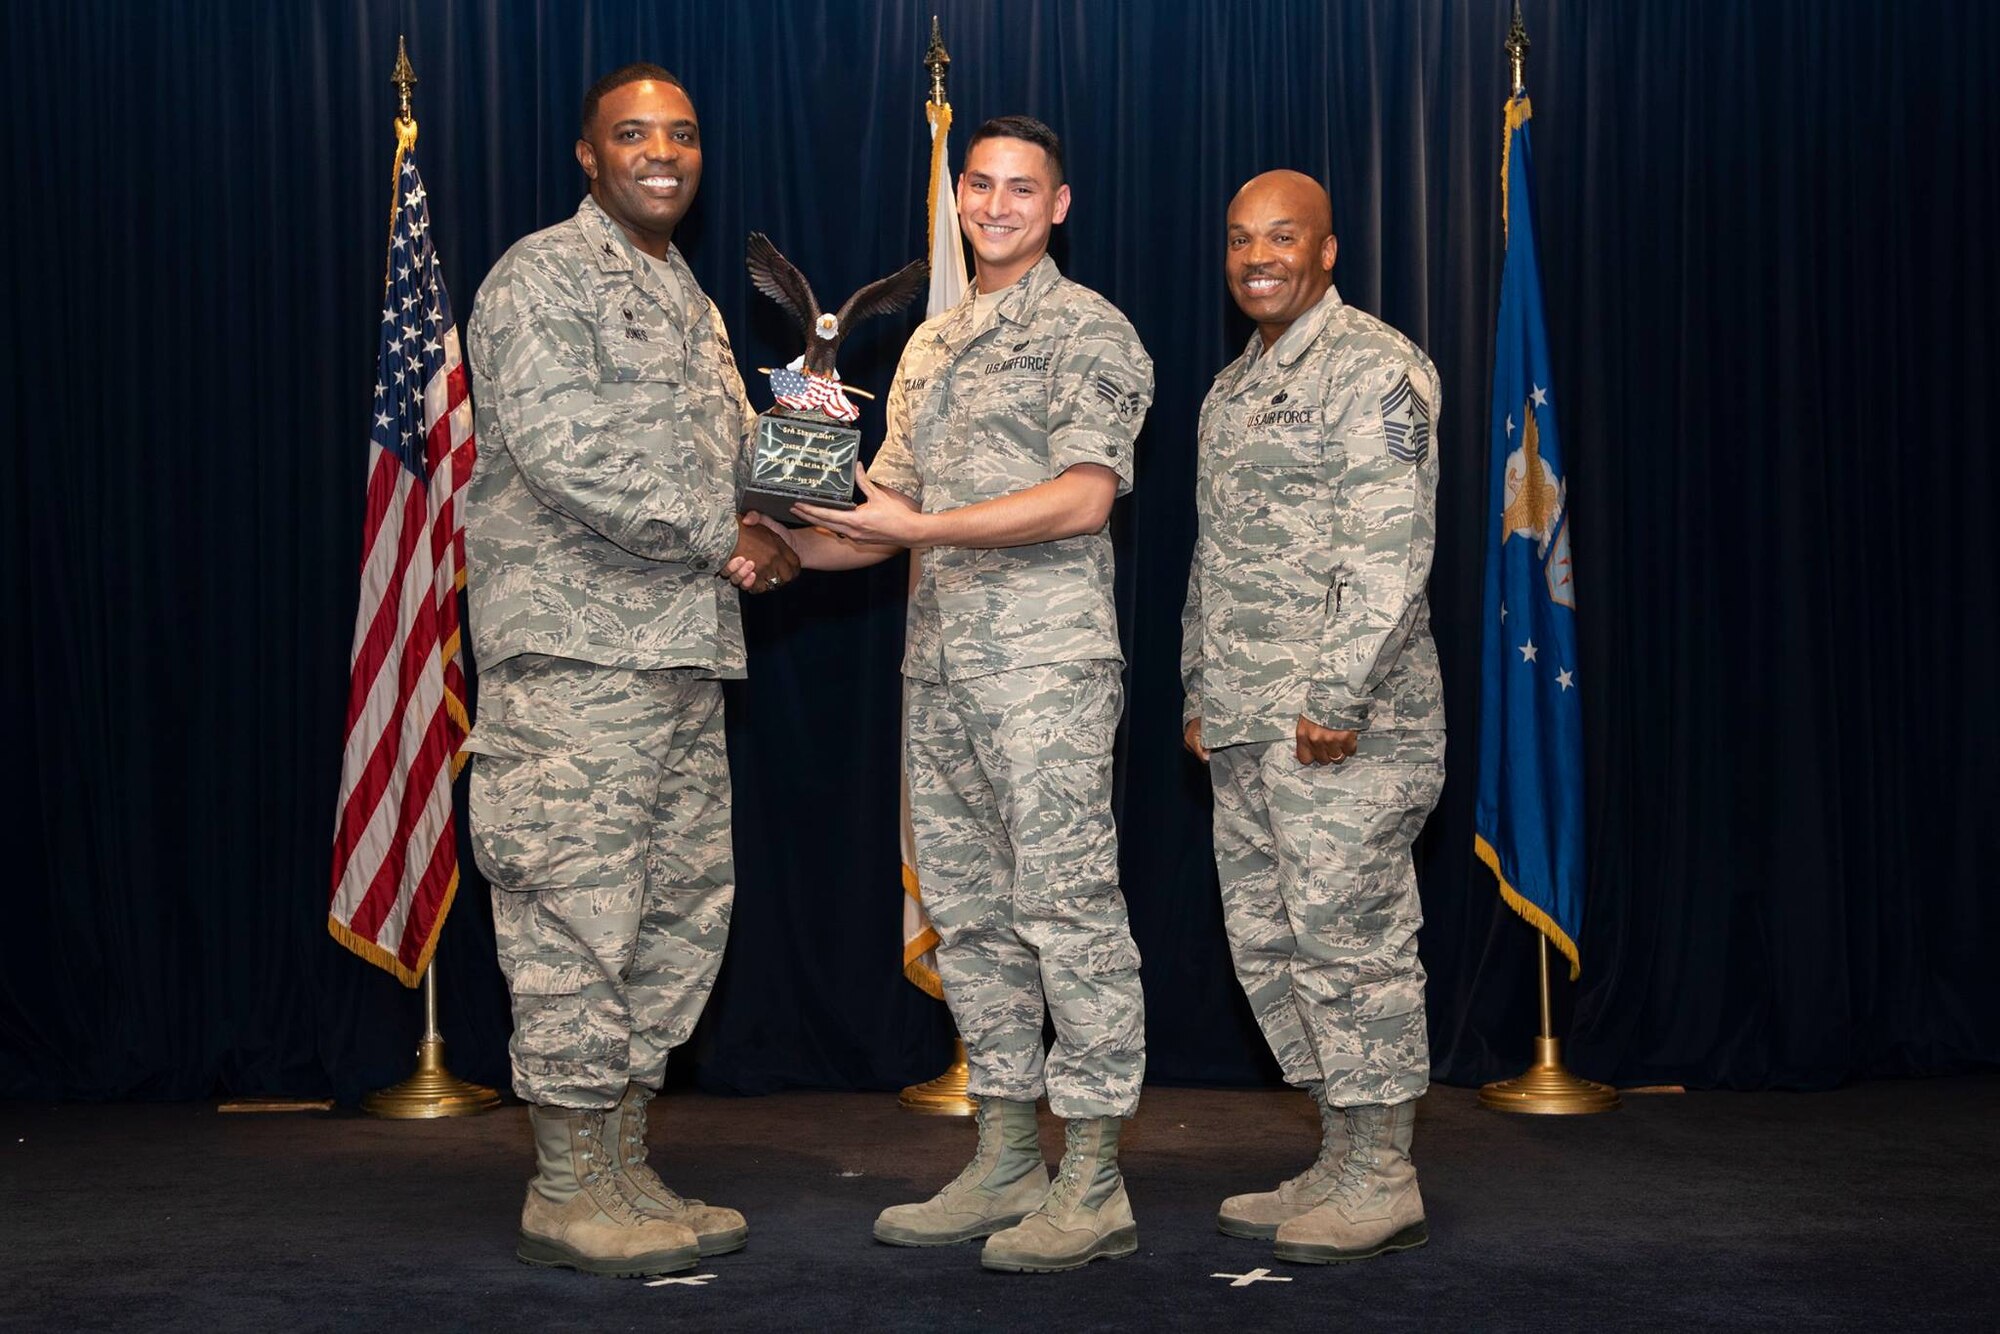 Senior Airman Shawn Clark, 374th Communications Squadron cyber operations technician,  is presented the Airman level 2nd Quarter 2018 award by Col. Otis C. Jones, 374th Airlift Wing commander, at Yokota Air Base, Japan, Aug. 2, 2018.